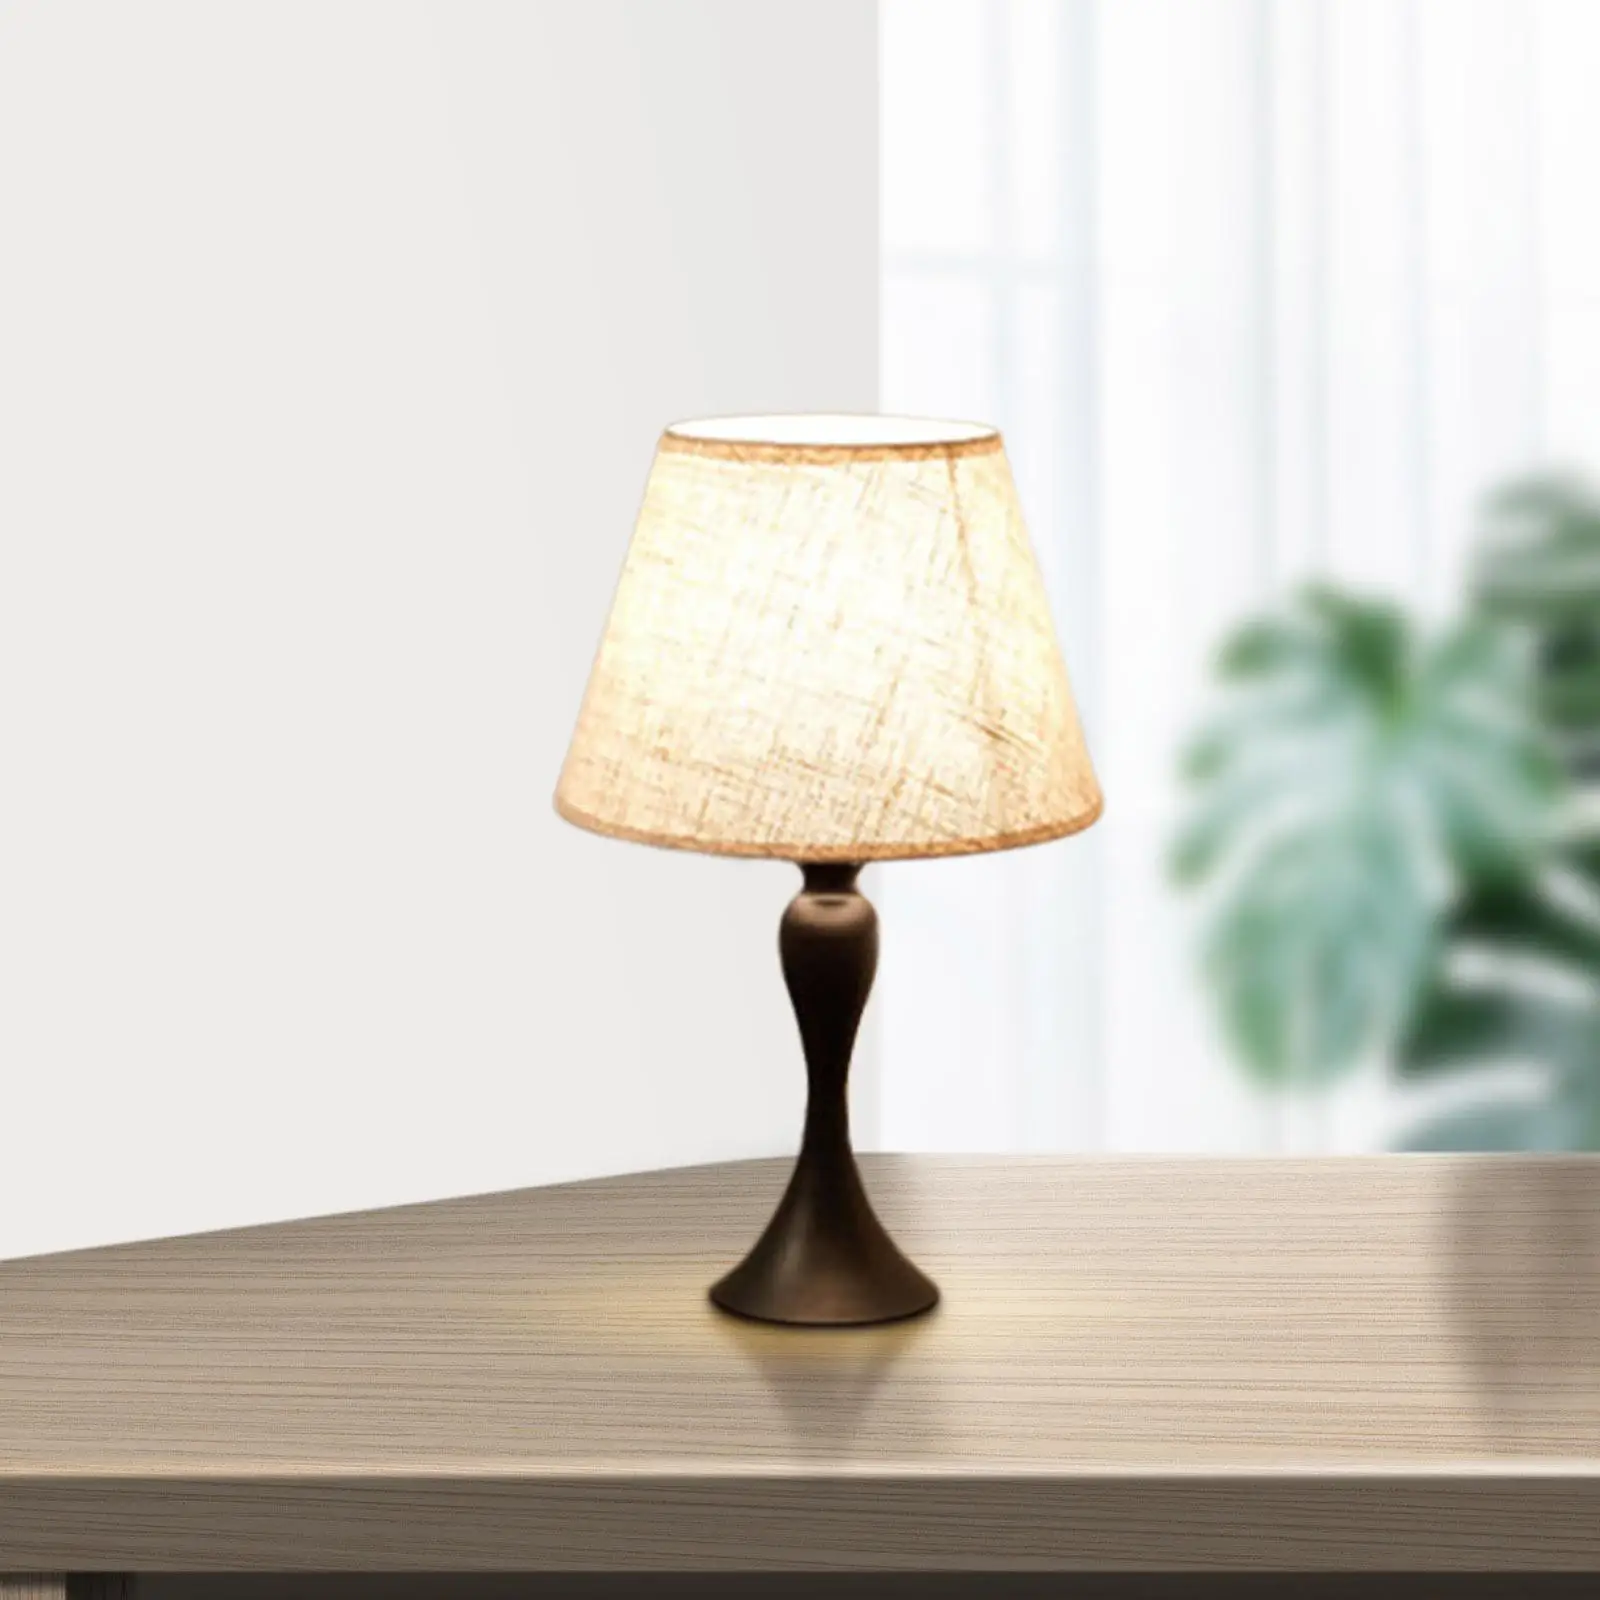 Retro Table Lamp Desk Light Bedside Lamp Cloth Lampshade Romantic Eye Protection Decorative Night Lamp for Study Room Home Decor